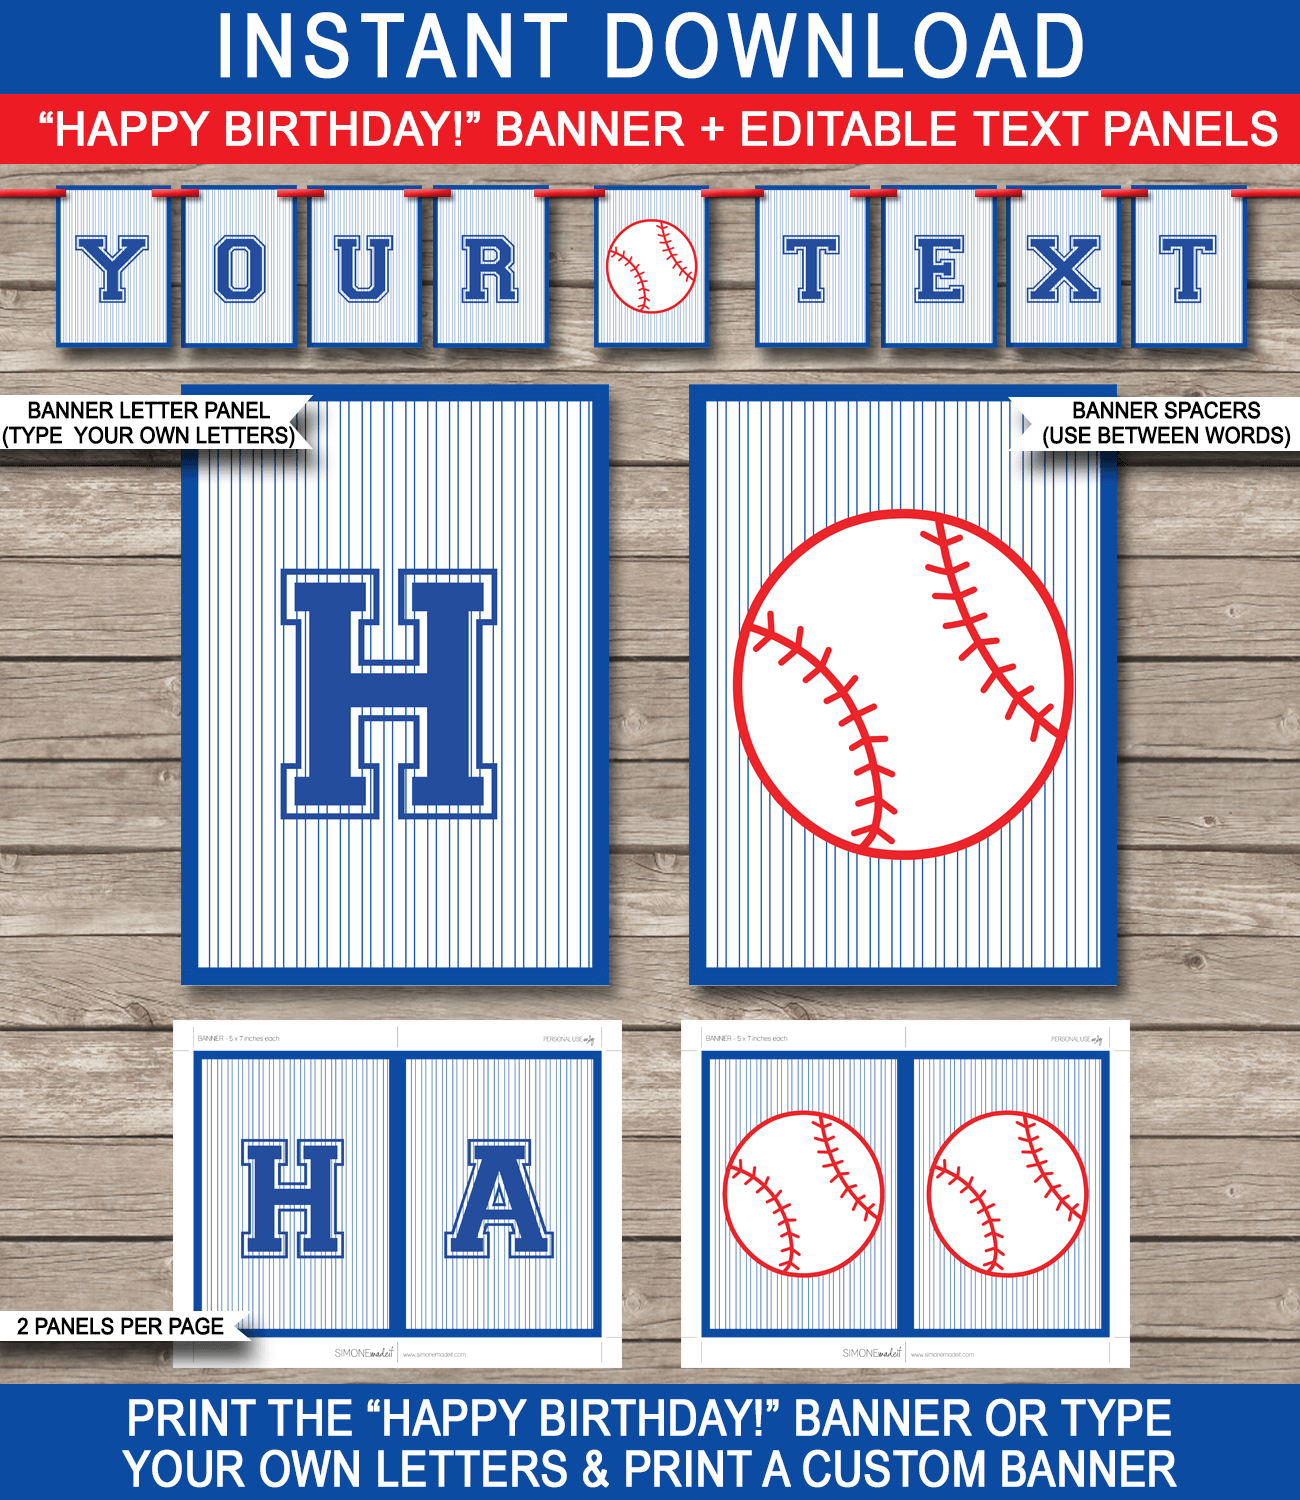 Baseball Party Banner Template - Baseball Bunting - Happy Birthday Banner - Birthday Party - Editable and Printable DIY Template - INSTANT DOWNLOAD $4.50 via simonemadeit.com